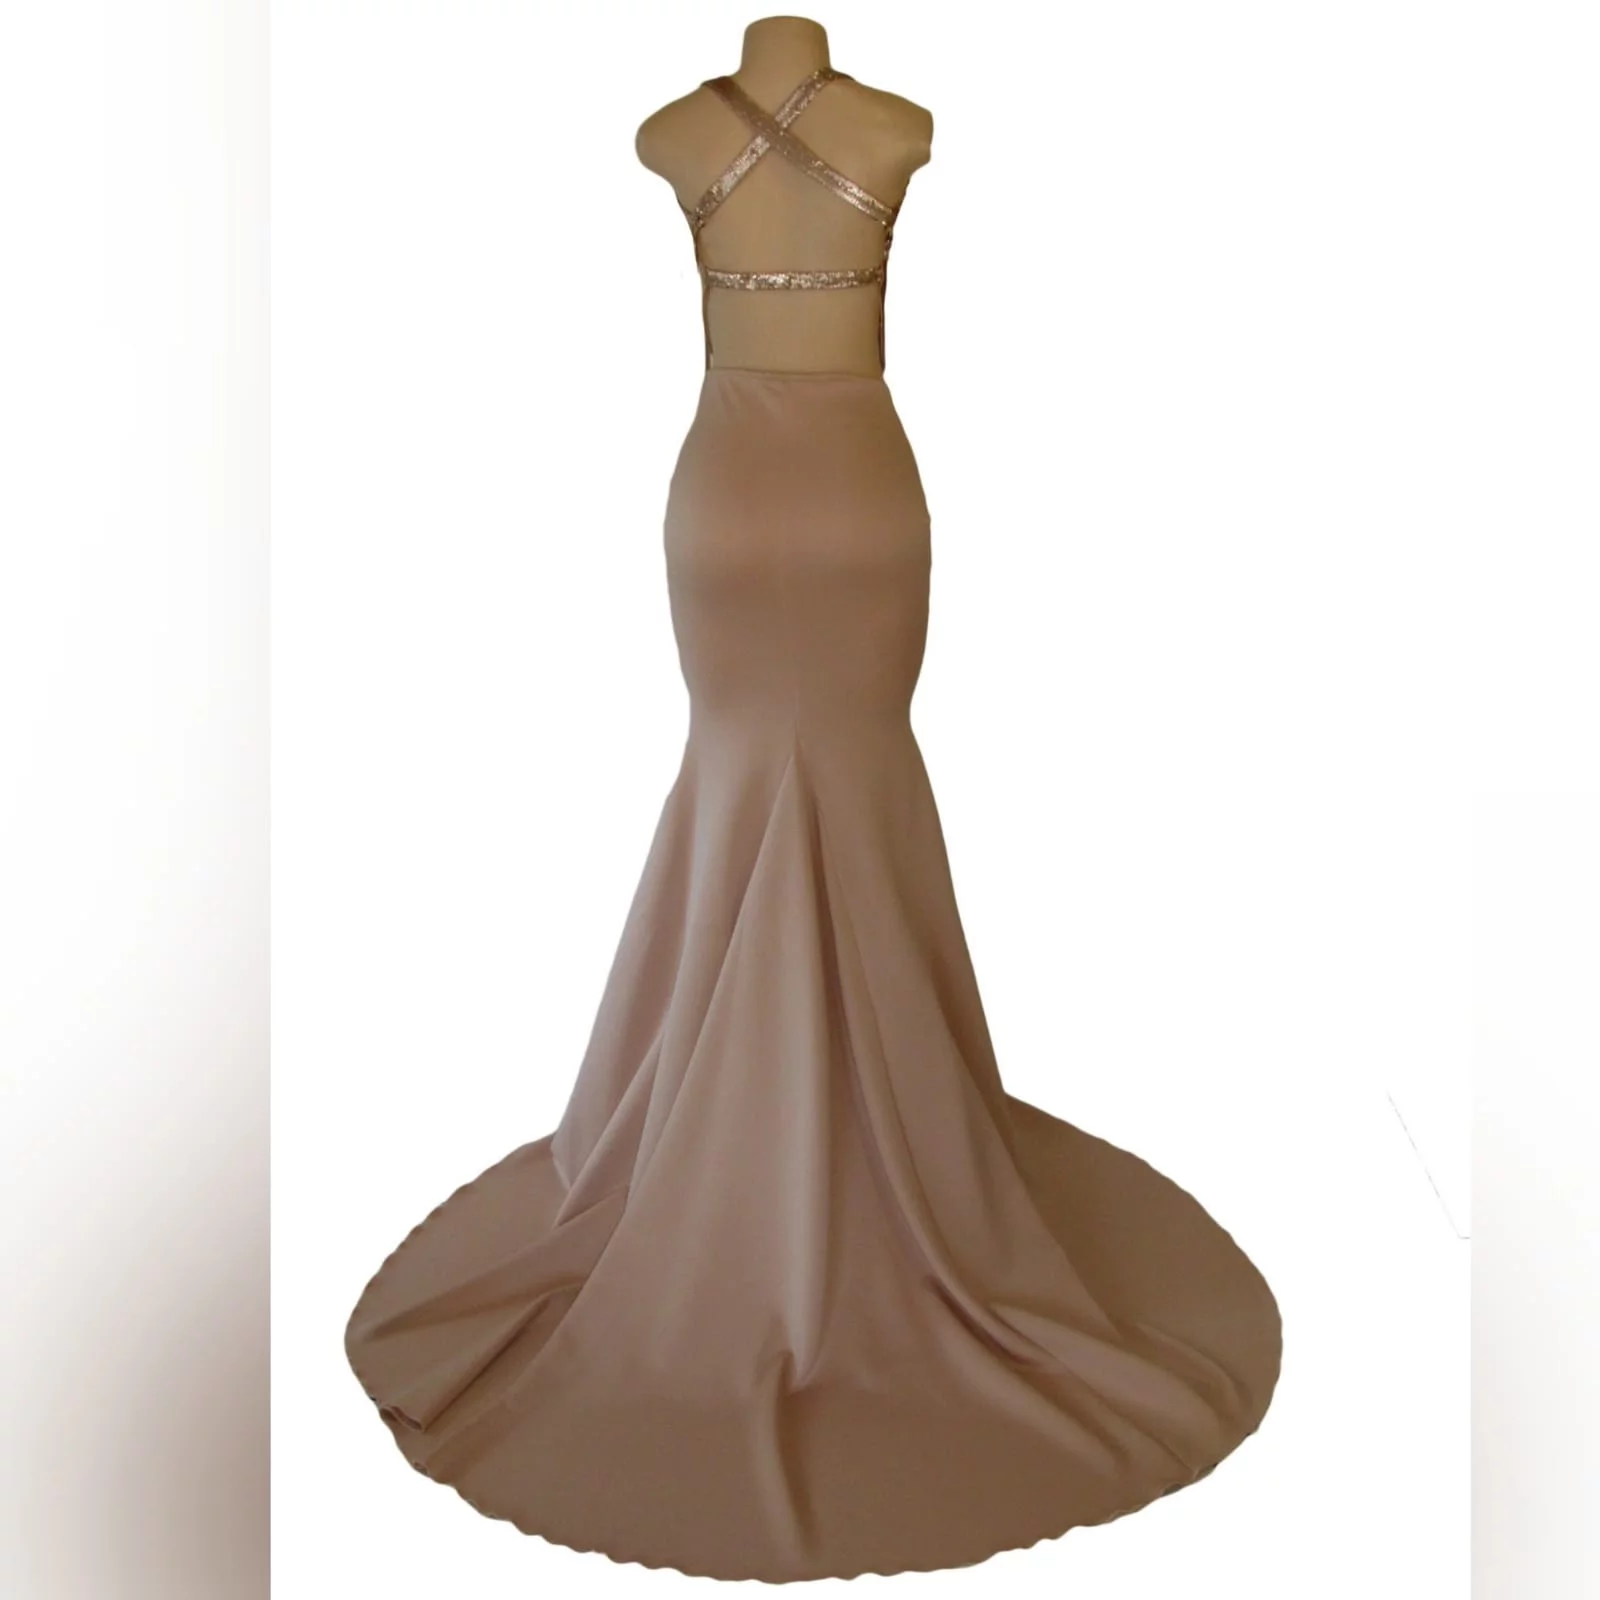 Nude and gold soft mermaid prom dress 6 nude and gold soft mermaid prom dress. Bodice in sequins with a plunging neckline and a naked back detailed with straps. Bottom with a long wide train.